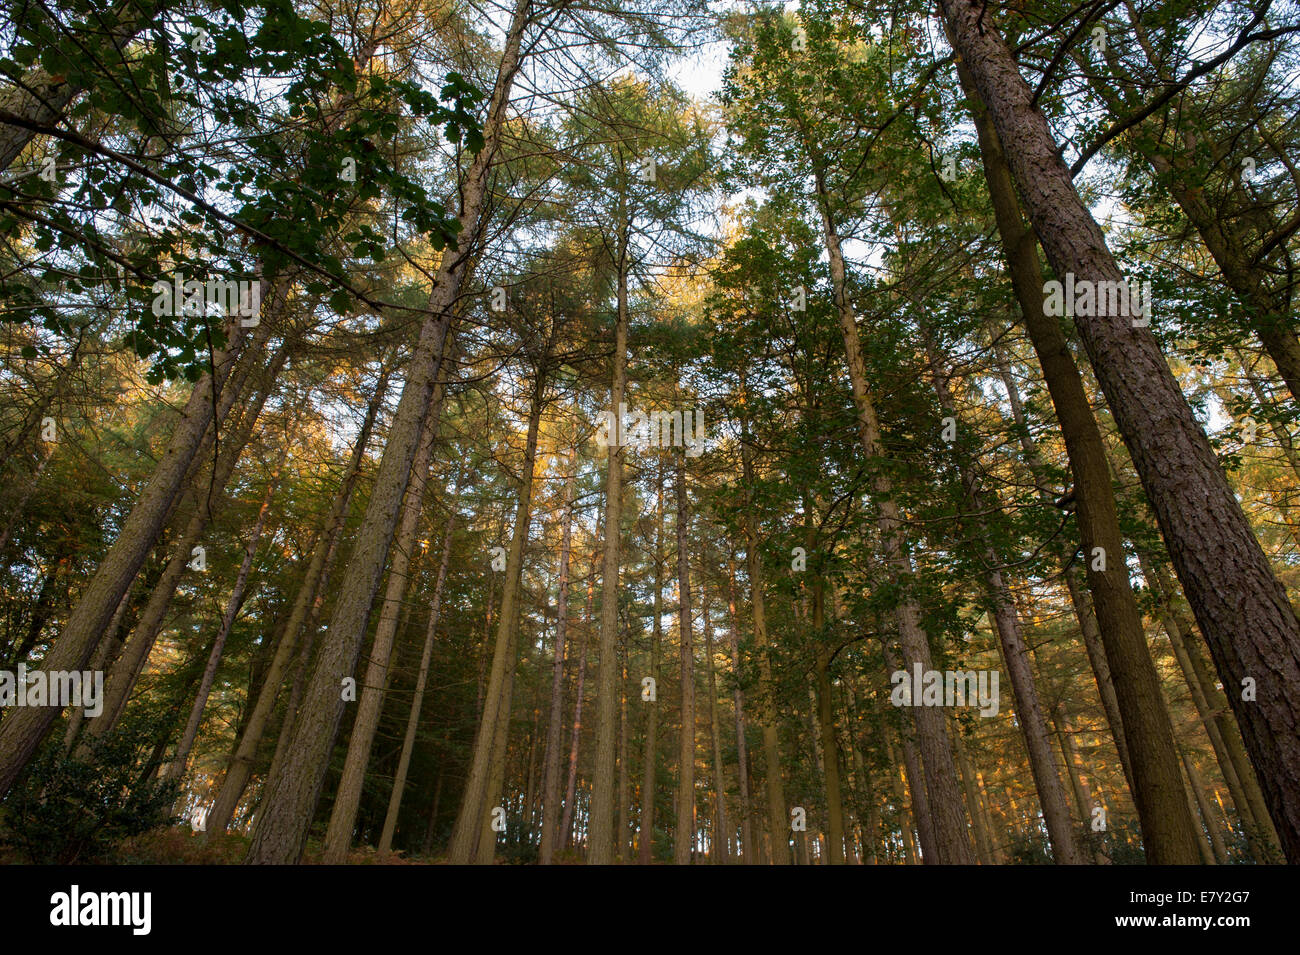 View looking upwards to the sky through branches of tall, soaring trees.in pine woodland - Strid Woods, Bolton Abbey Estate, Yorkshire, England, UK. Stock Photo